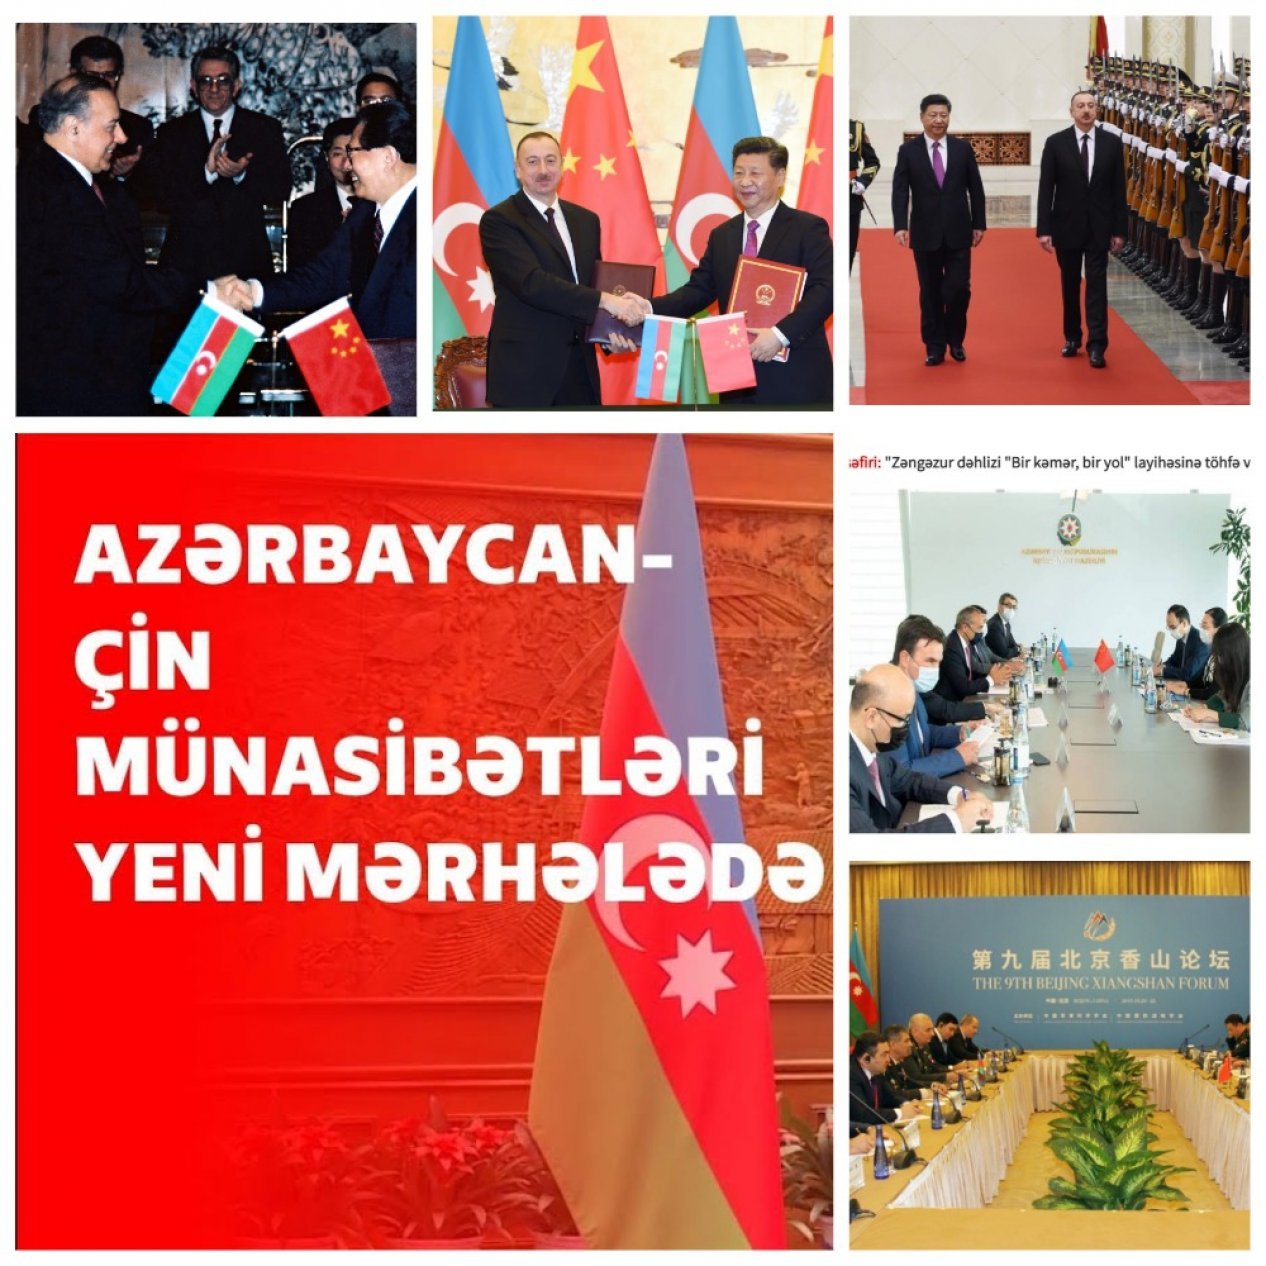 China-Azerbaijan: reliable cooperative relations where geopolitical, economic, and strategic shared visions overlap